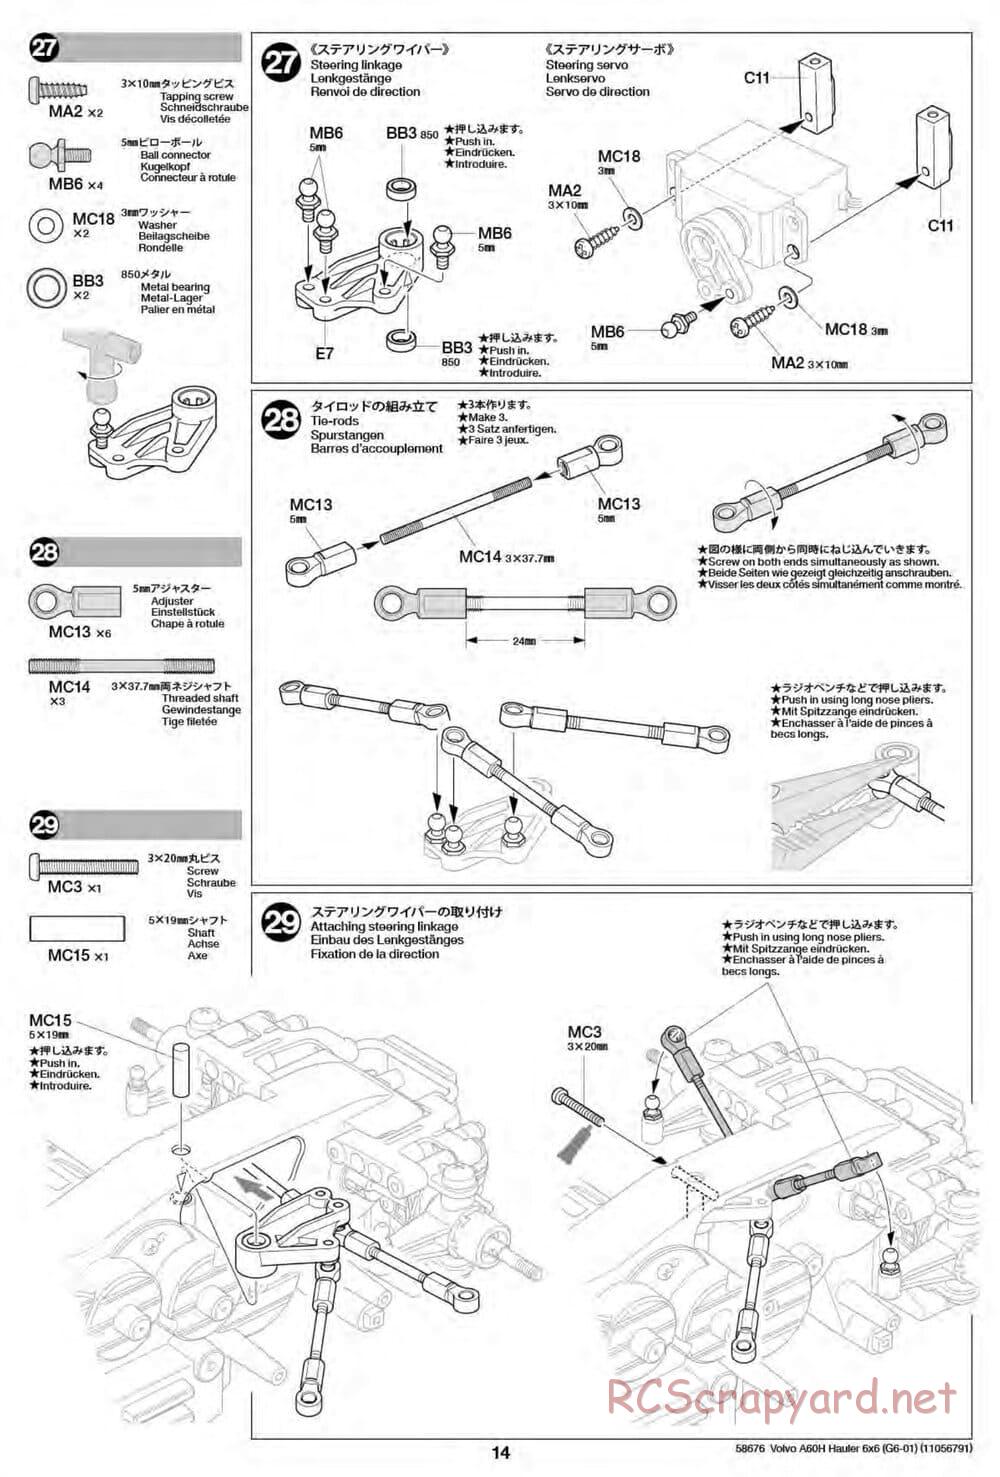 Tamiya - Volvo A60H Dump Truck 6x6 - G6-01 Chassis - Manual - Page 13